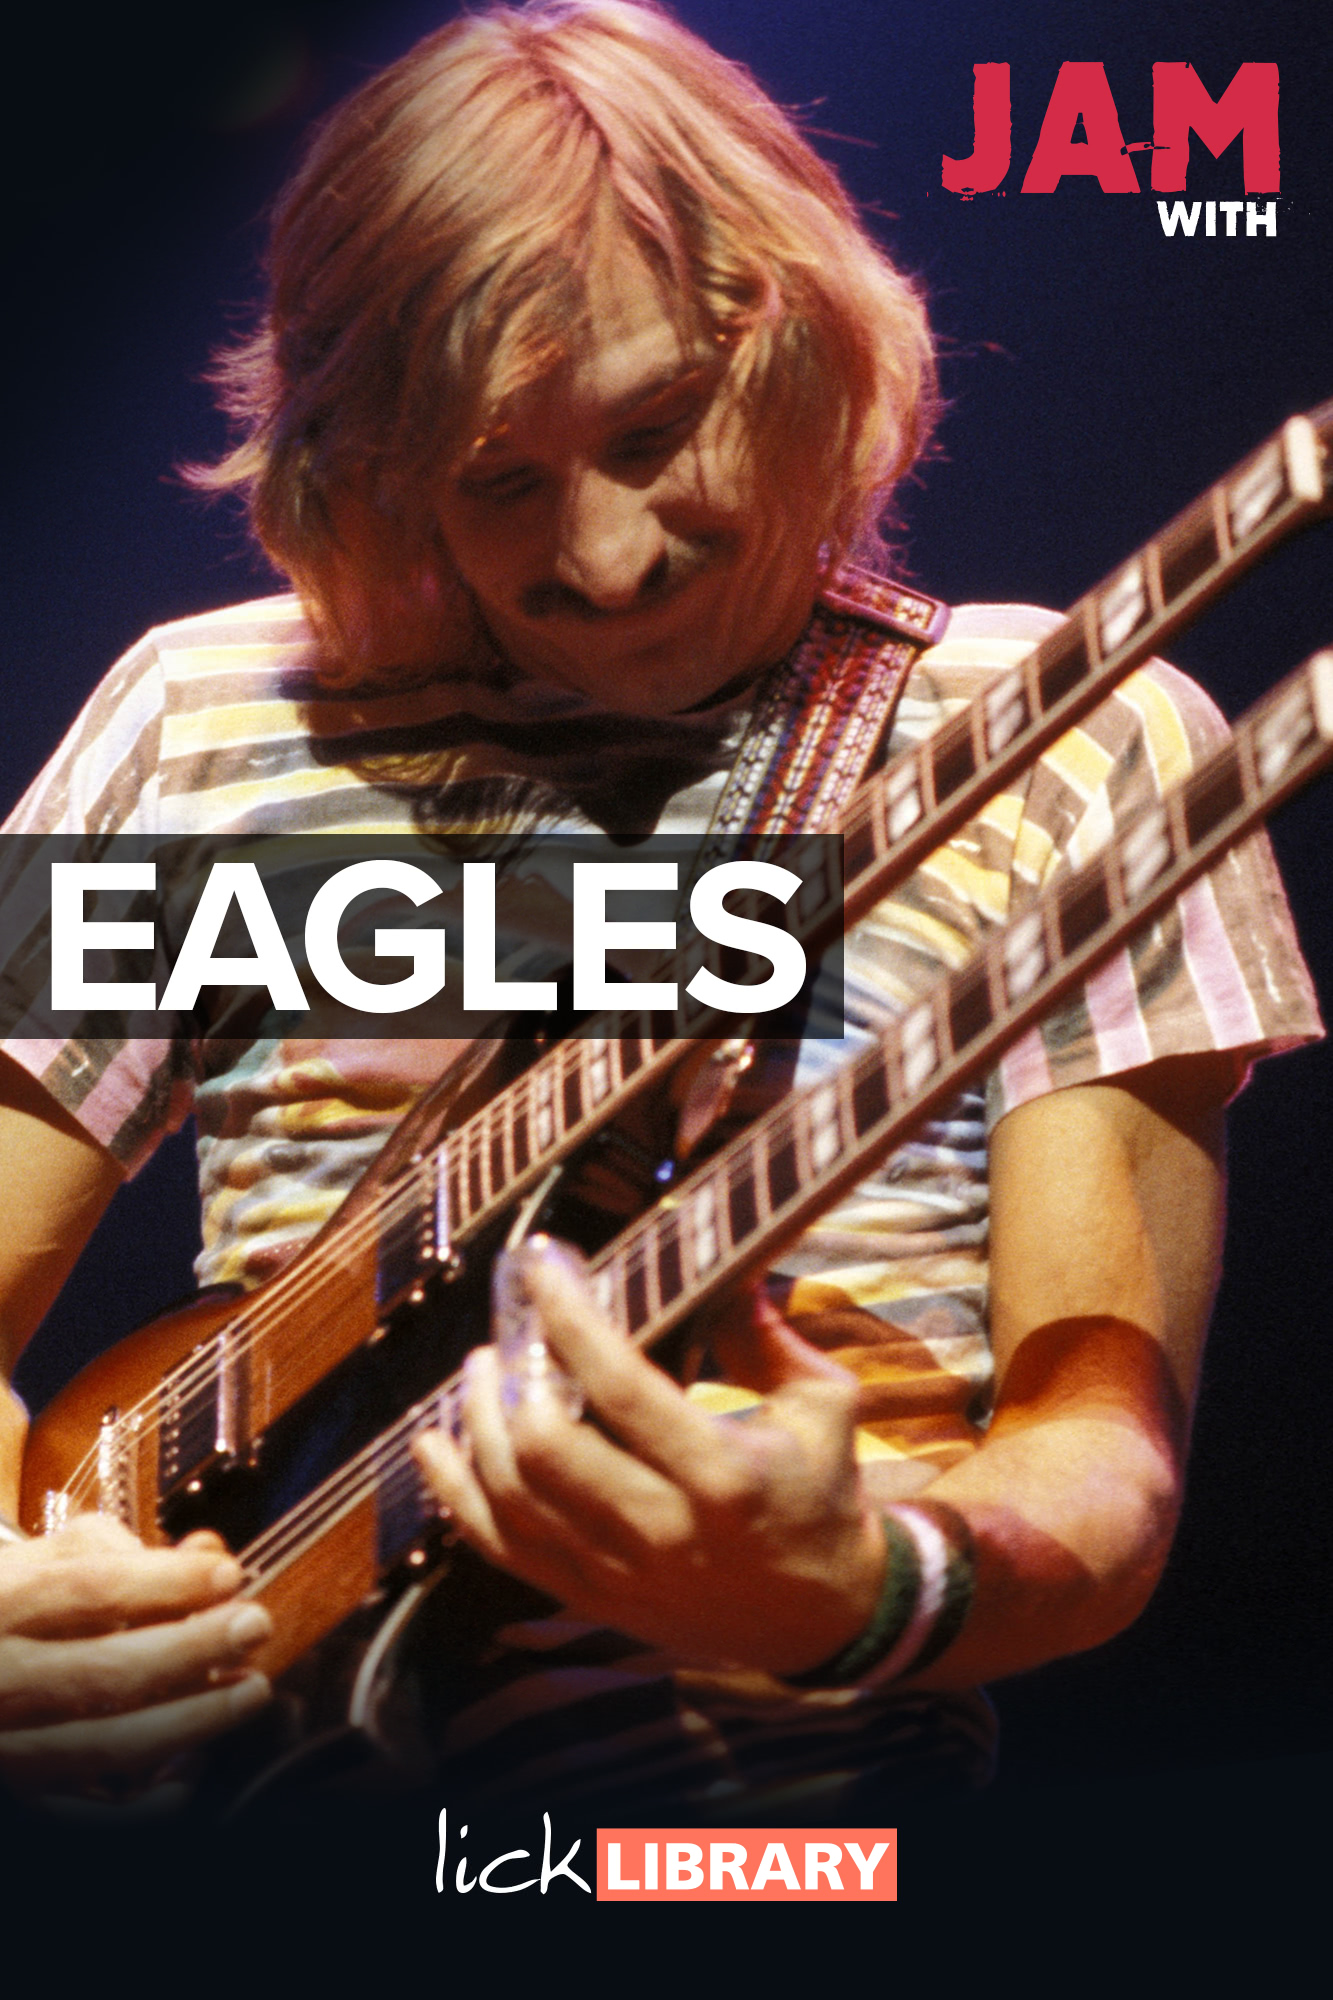 Jam With Eagles